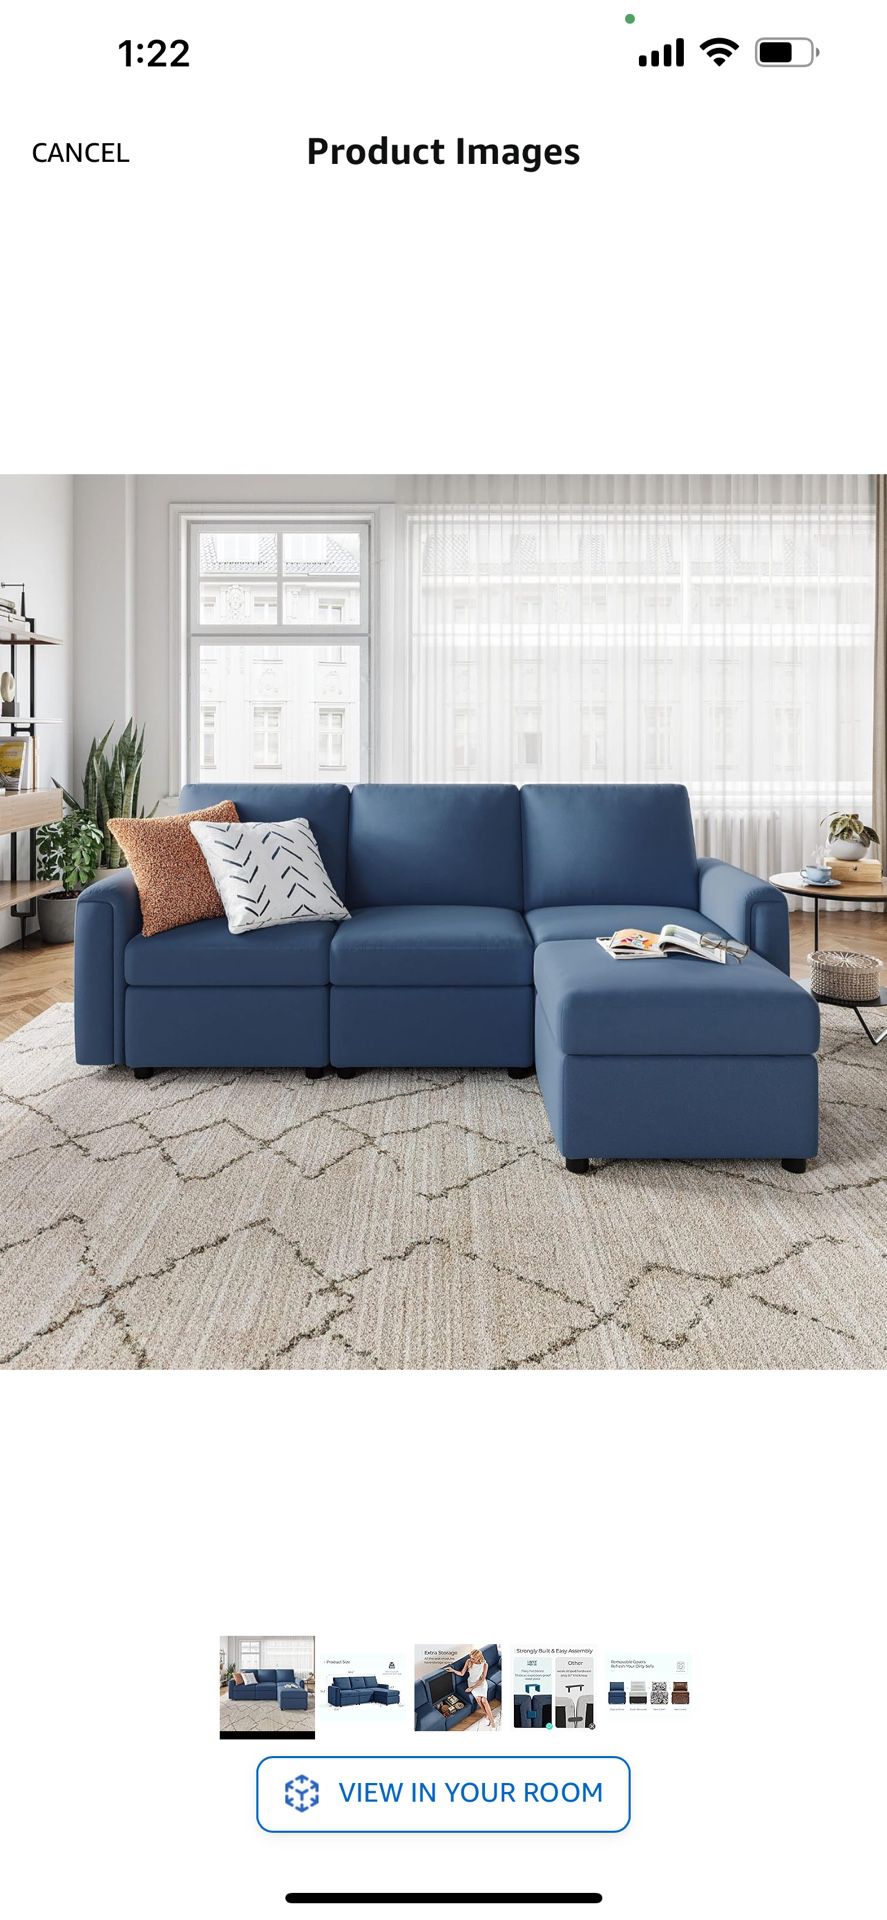 New in box  Modular Sofa, Sectional Couch L Shaped Sofa with Storage, Modular Sectionals with Ottomans, Modern Small Sofa Couch with Chaise for Living